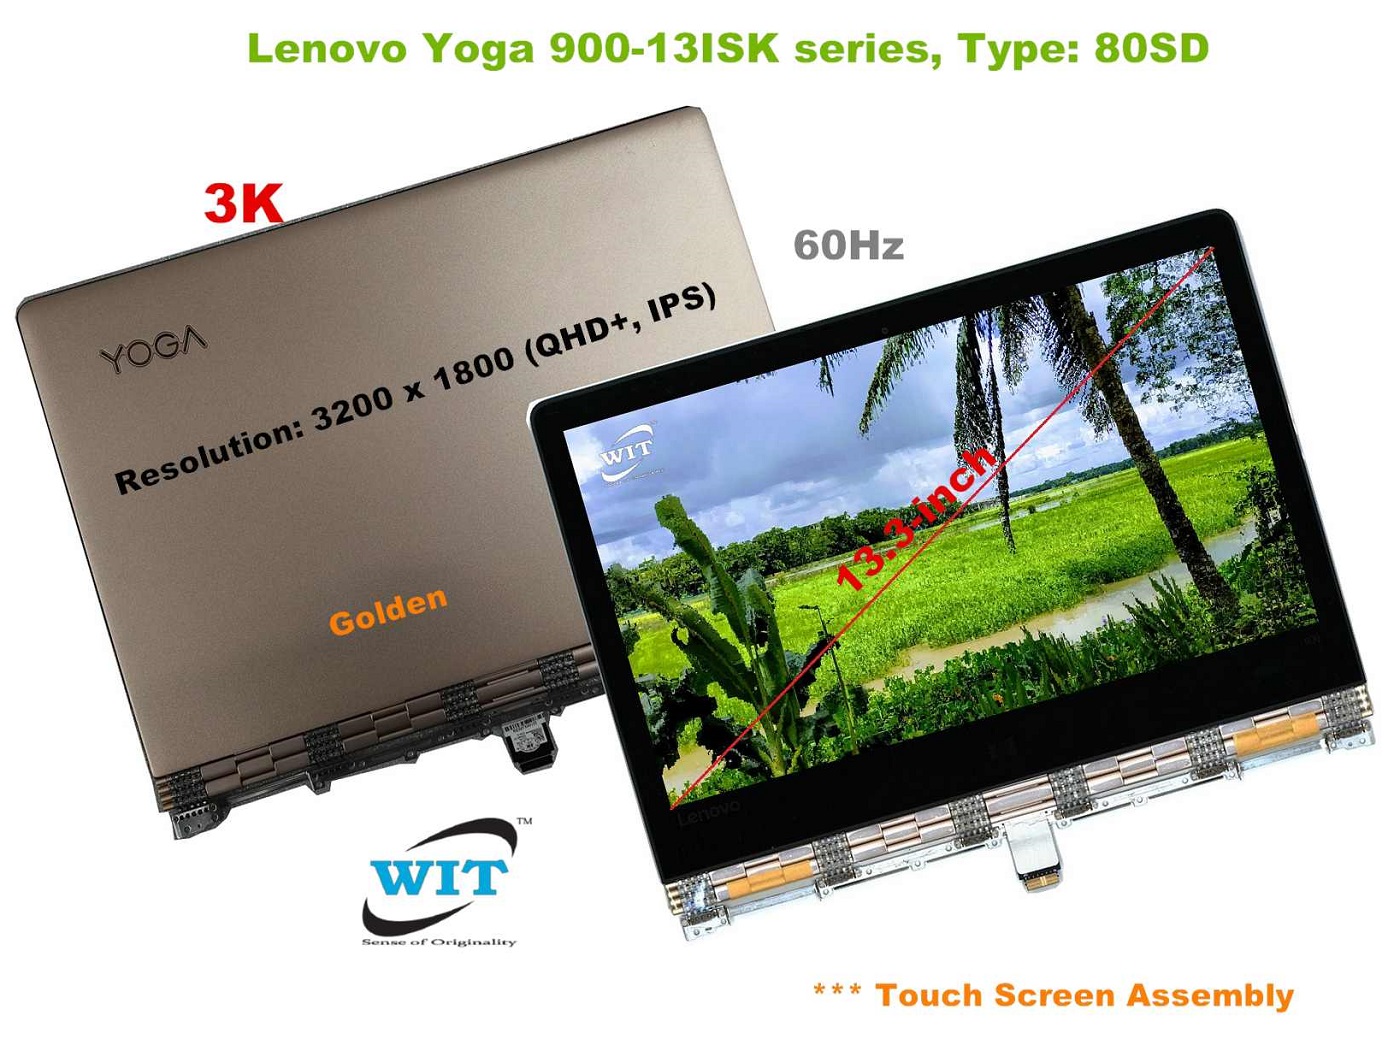  3K Touchscreen with Complete LED Assembly for Lenovo IdeaPad Yoga  900-13ISK, Yoga 900-13ISK2 series, Assembly Color: Gold, Resolution:  3200x1800 (QHD+), Frequency : 60Hz, P/N: 5D10K26885, 5D10K26886,  5D10K26887, 5D10L58670, 5D10L58671 ...